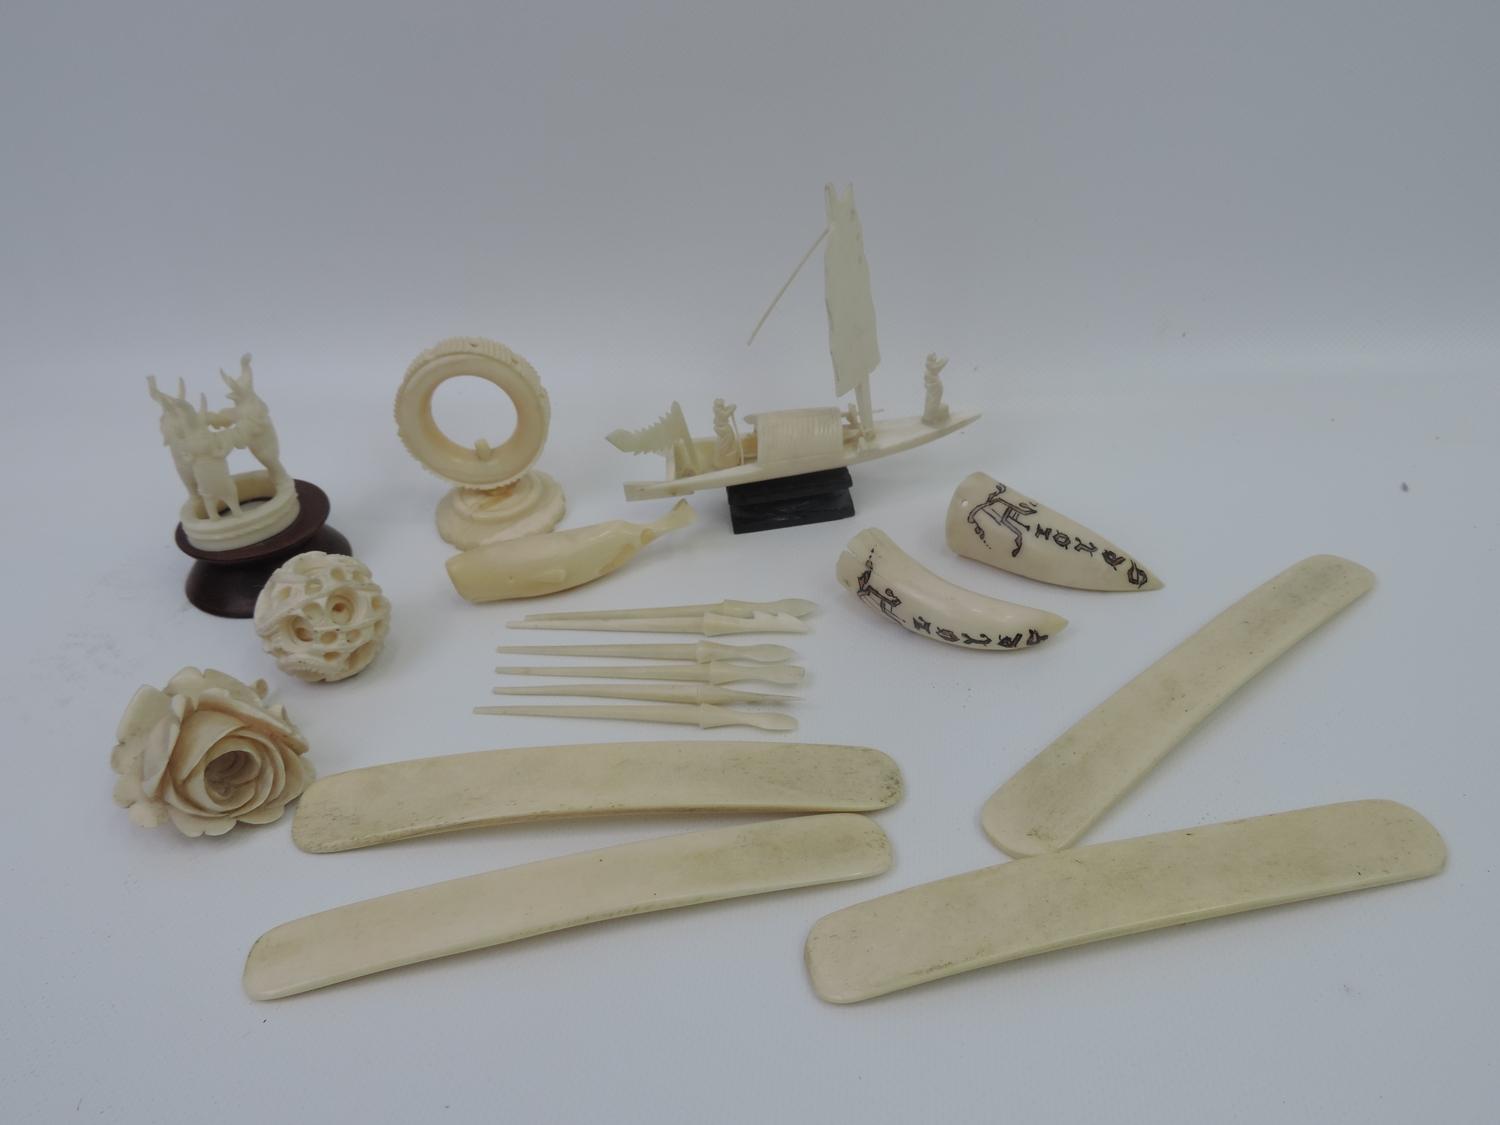 Quantity of Carved Bone and Ivory Ornaments - To Include Brooch and Puzzle Ball